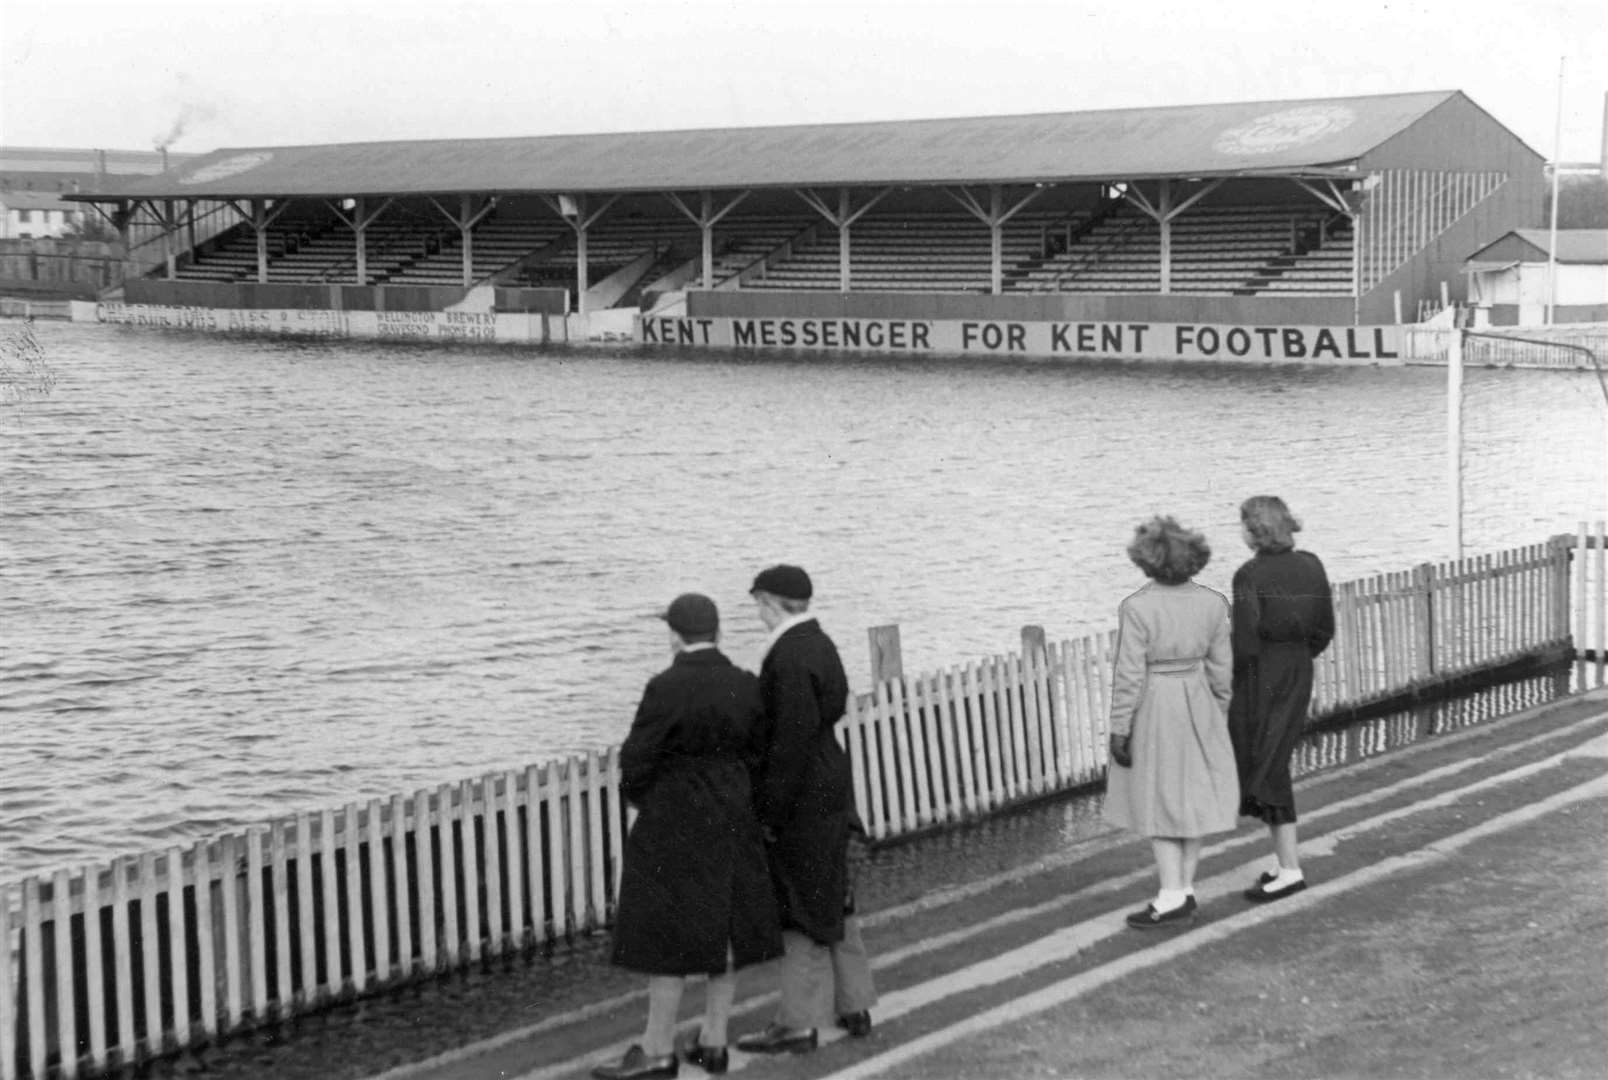 Water polo would have been a more appropriate sport at Gravesend's Northfleet Football ground when the floods hit in 1953